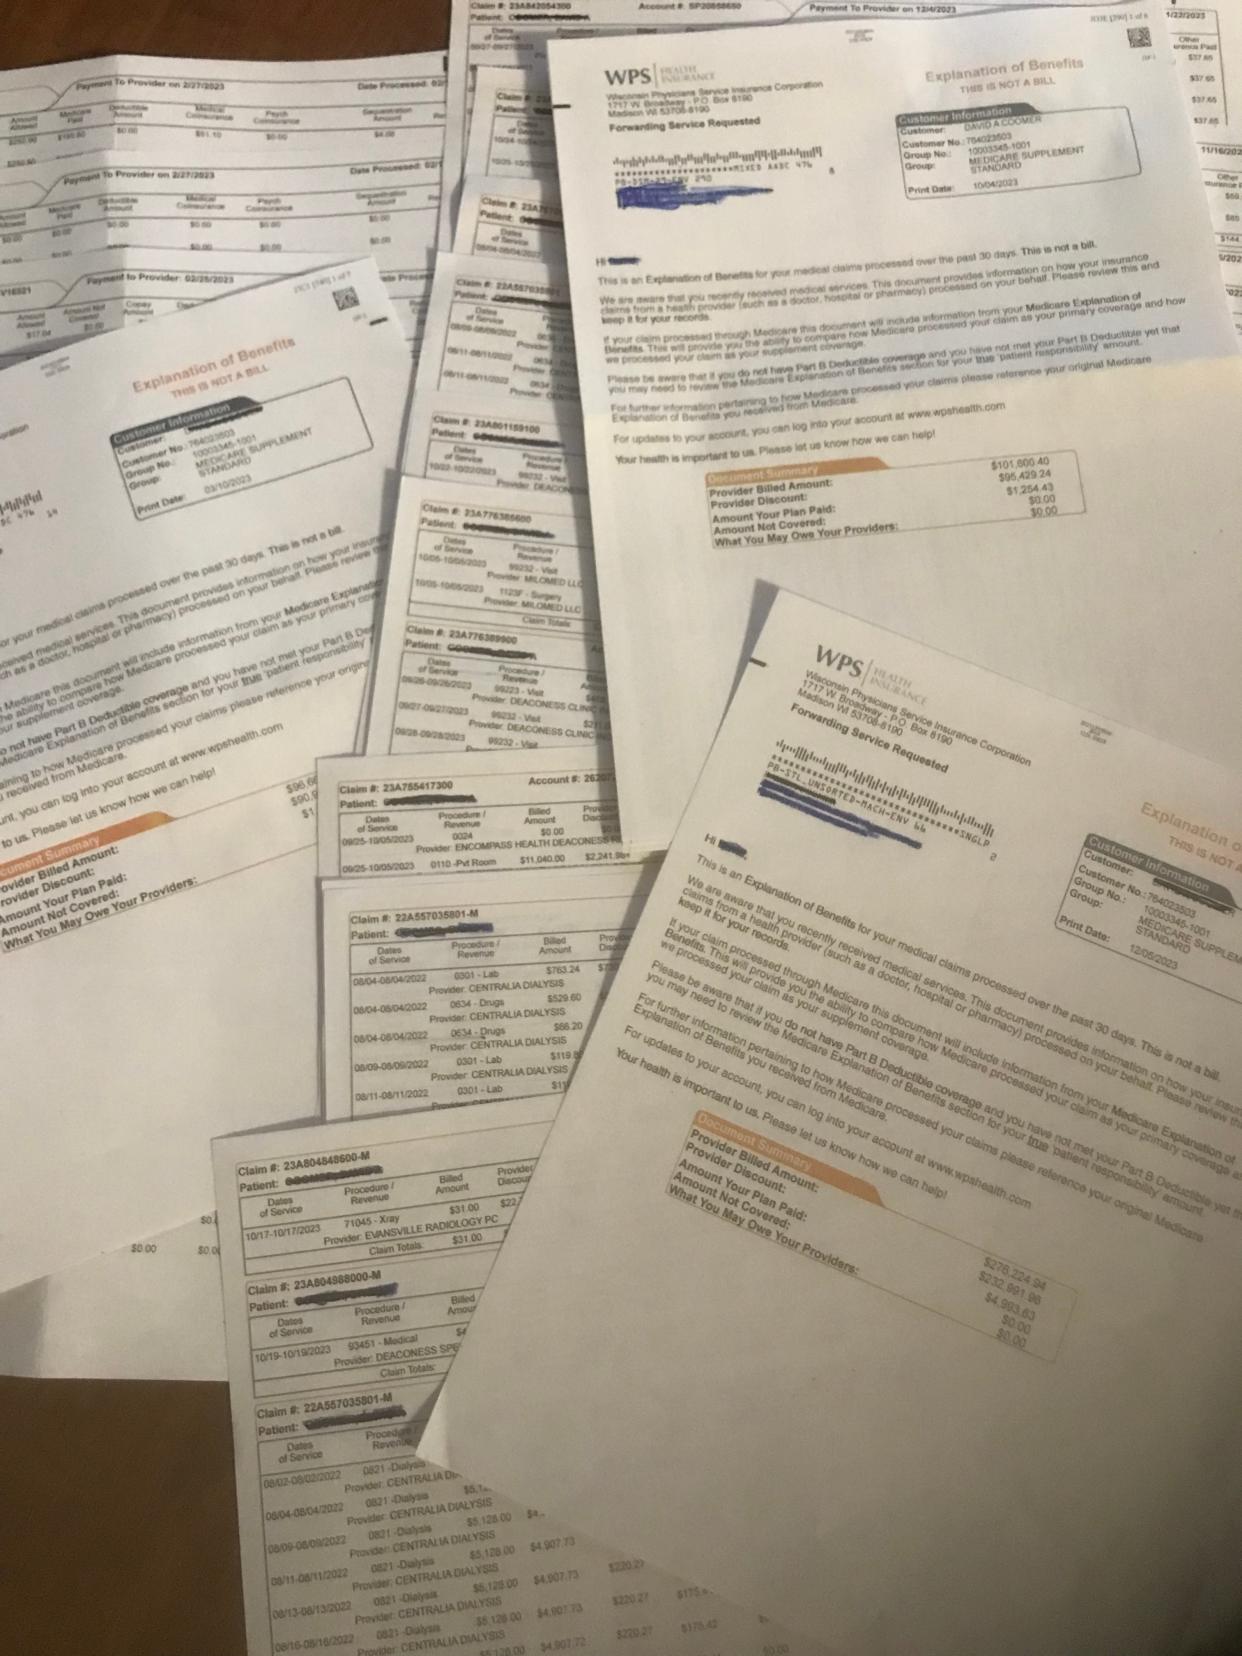 Healthcare bills and statements are strewn across a kitchen table. The costs listed within the Hoosier’s statements demonstrate the importance of obtaining quality health insurance with prices ranging from $90,000 to $276,000 for uninsured hospital visits.